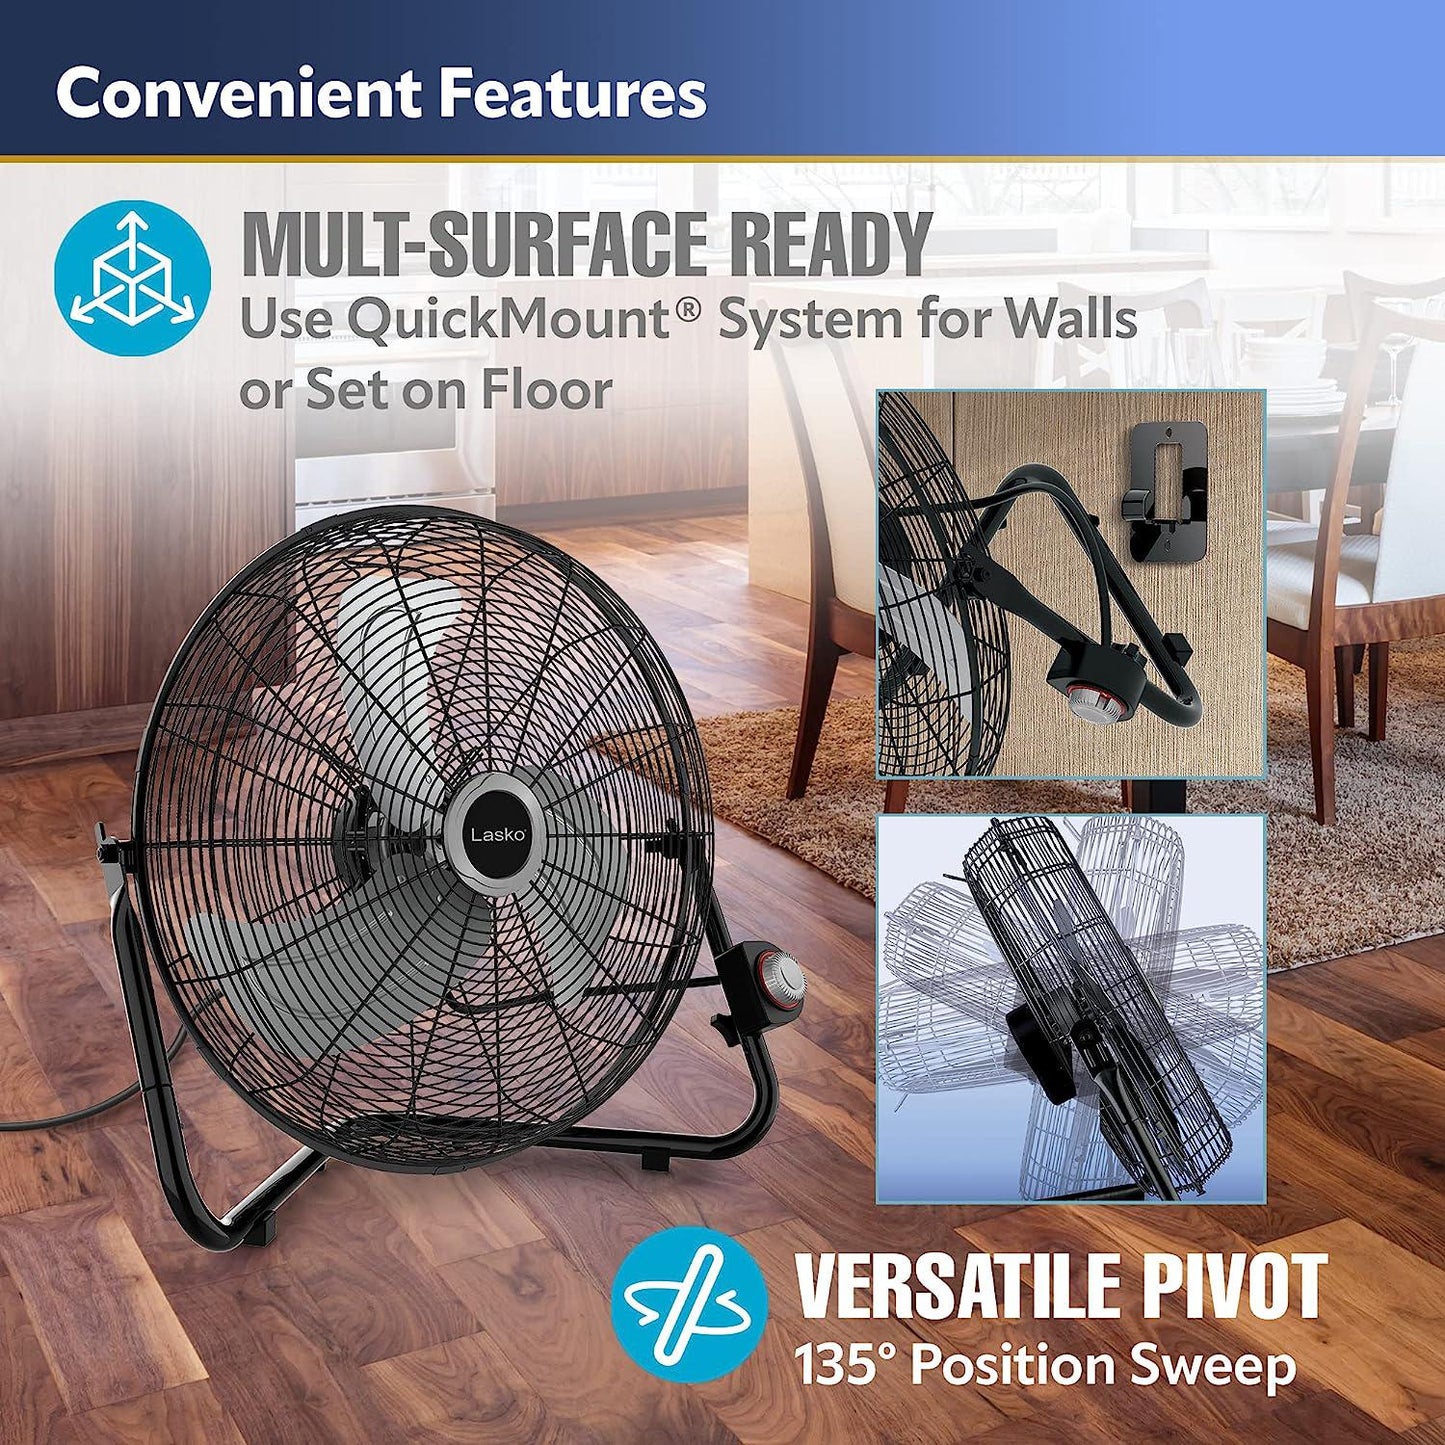 High Velocity Floor Fan with Wall mount Option, 3 Powerful Speeds, Pivoting Fan Head for Home, Garage, Attic, 20 , Black, 2264QM